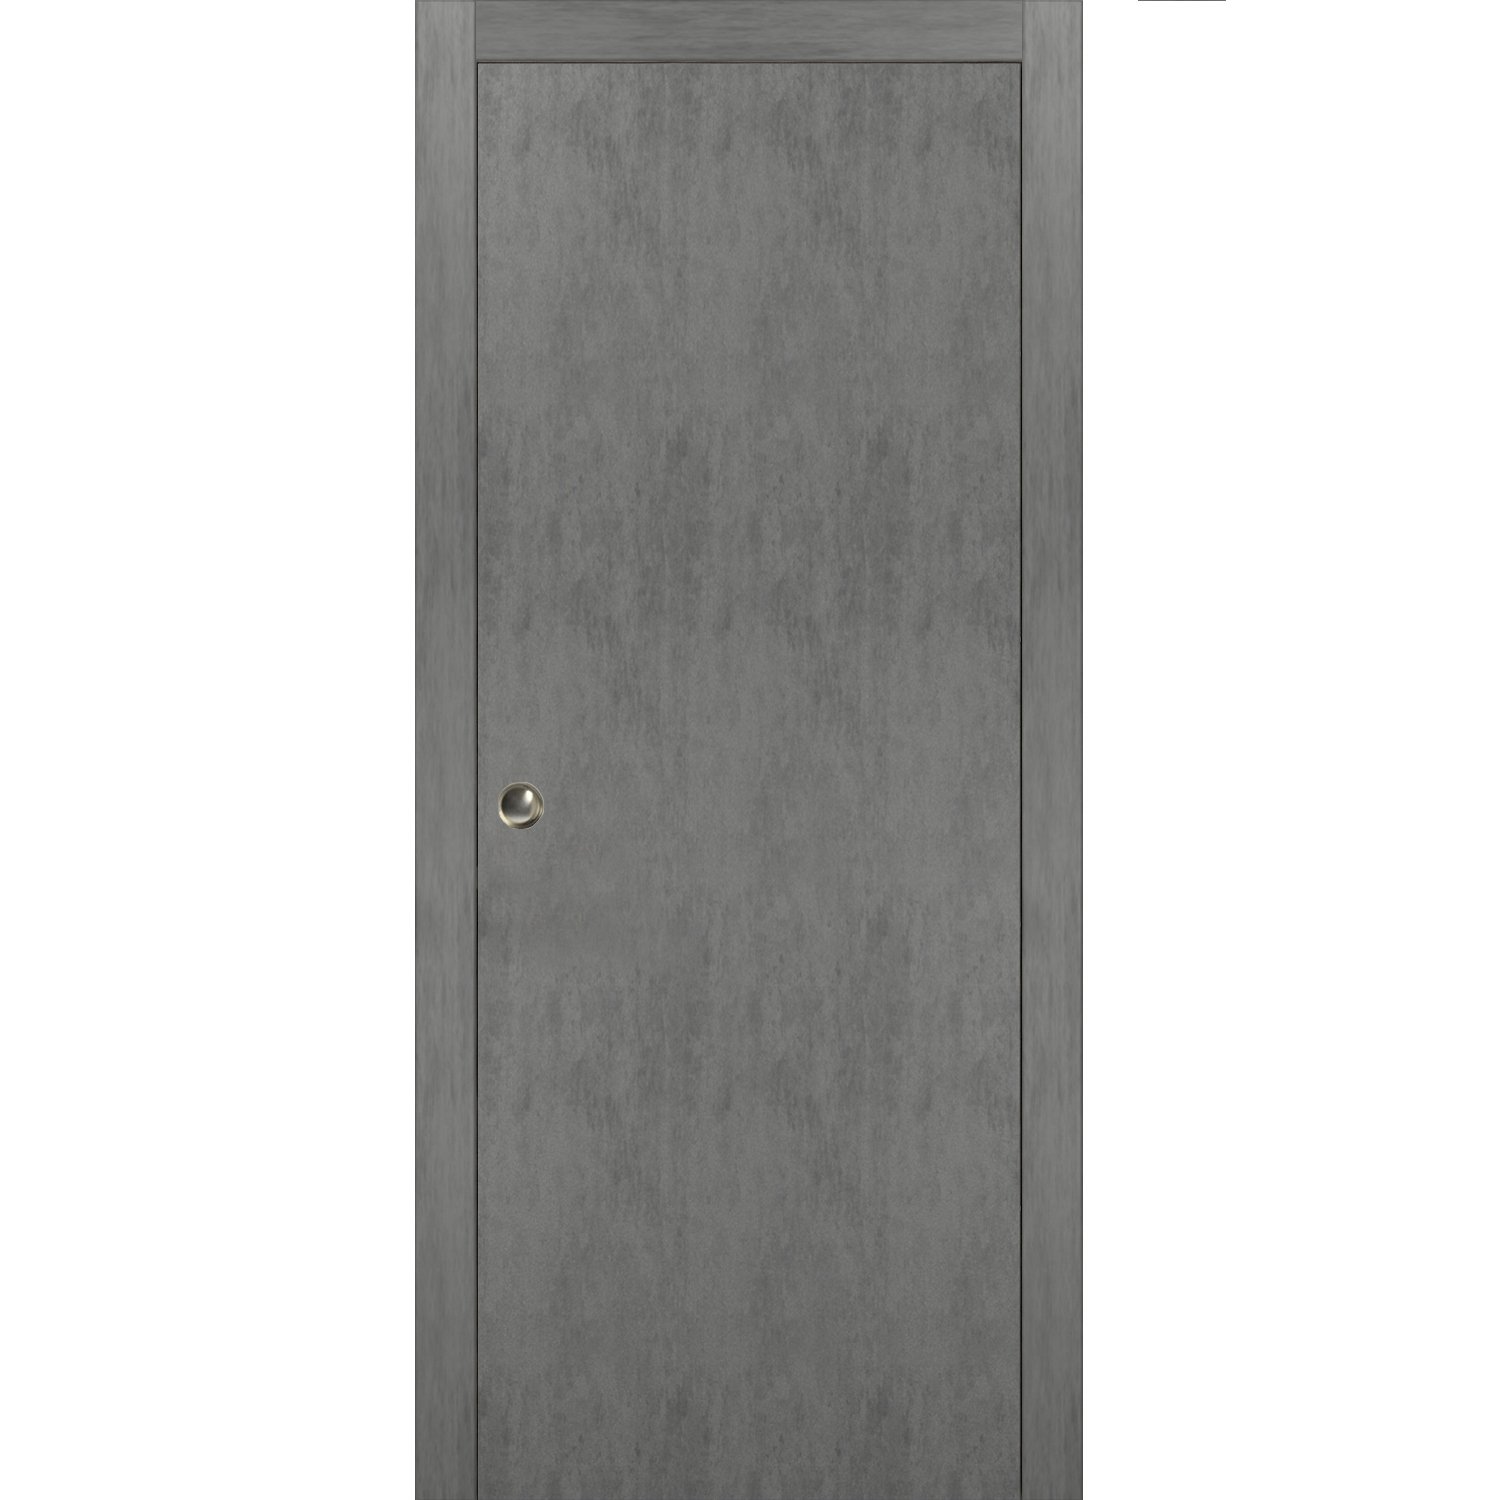 Sliding French Pocket Door 30 x 84 inches with | Planum 0010 Concrete | Kit Trims Rail Hardware | Solid Wood Interior Bedroom Sturdy Doors - image 1 of 3